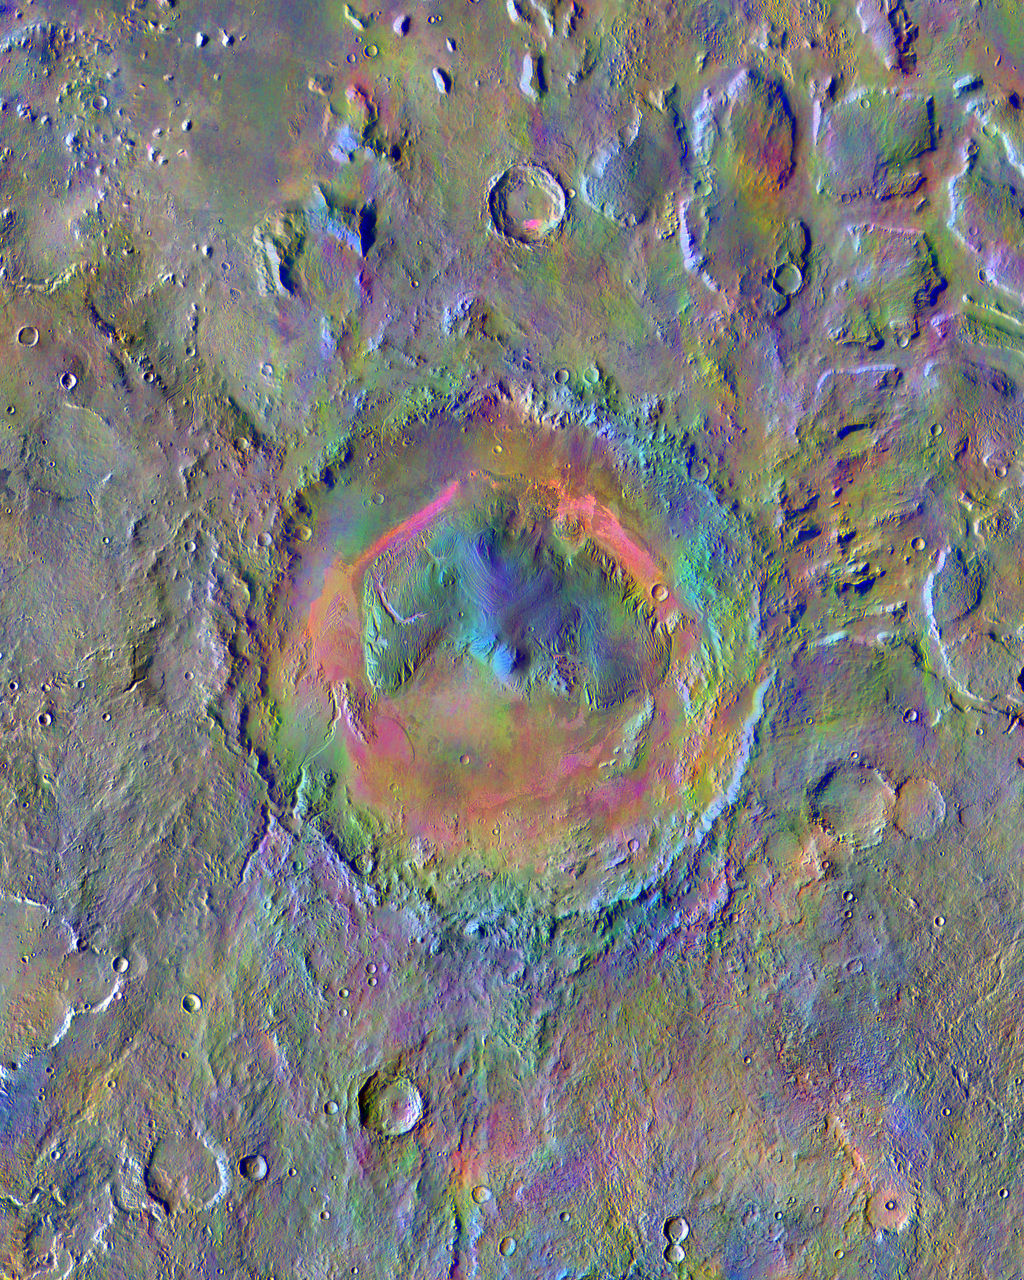 Gale Crater, home to NASA's Curiosity Mars rover, shows a new face in this image made using data from the THEMIS camera on NASA's Mars Odyssey orbiter.